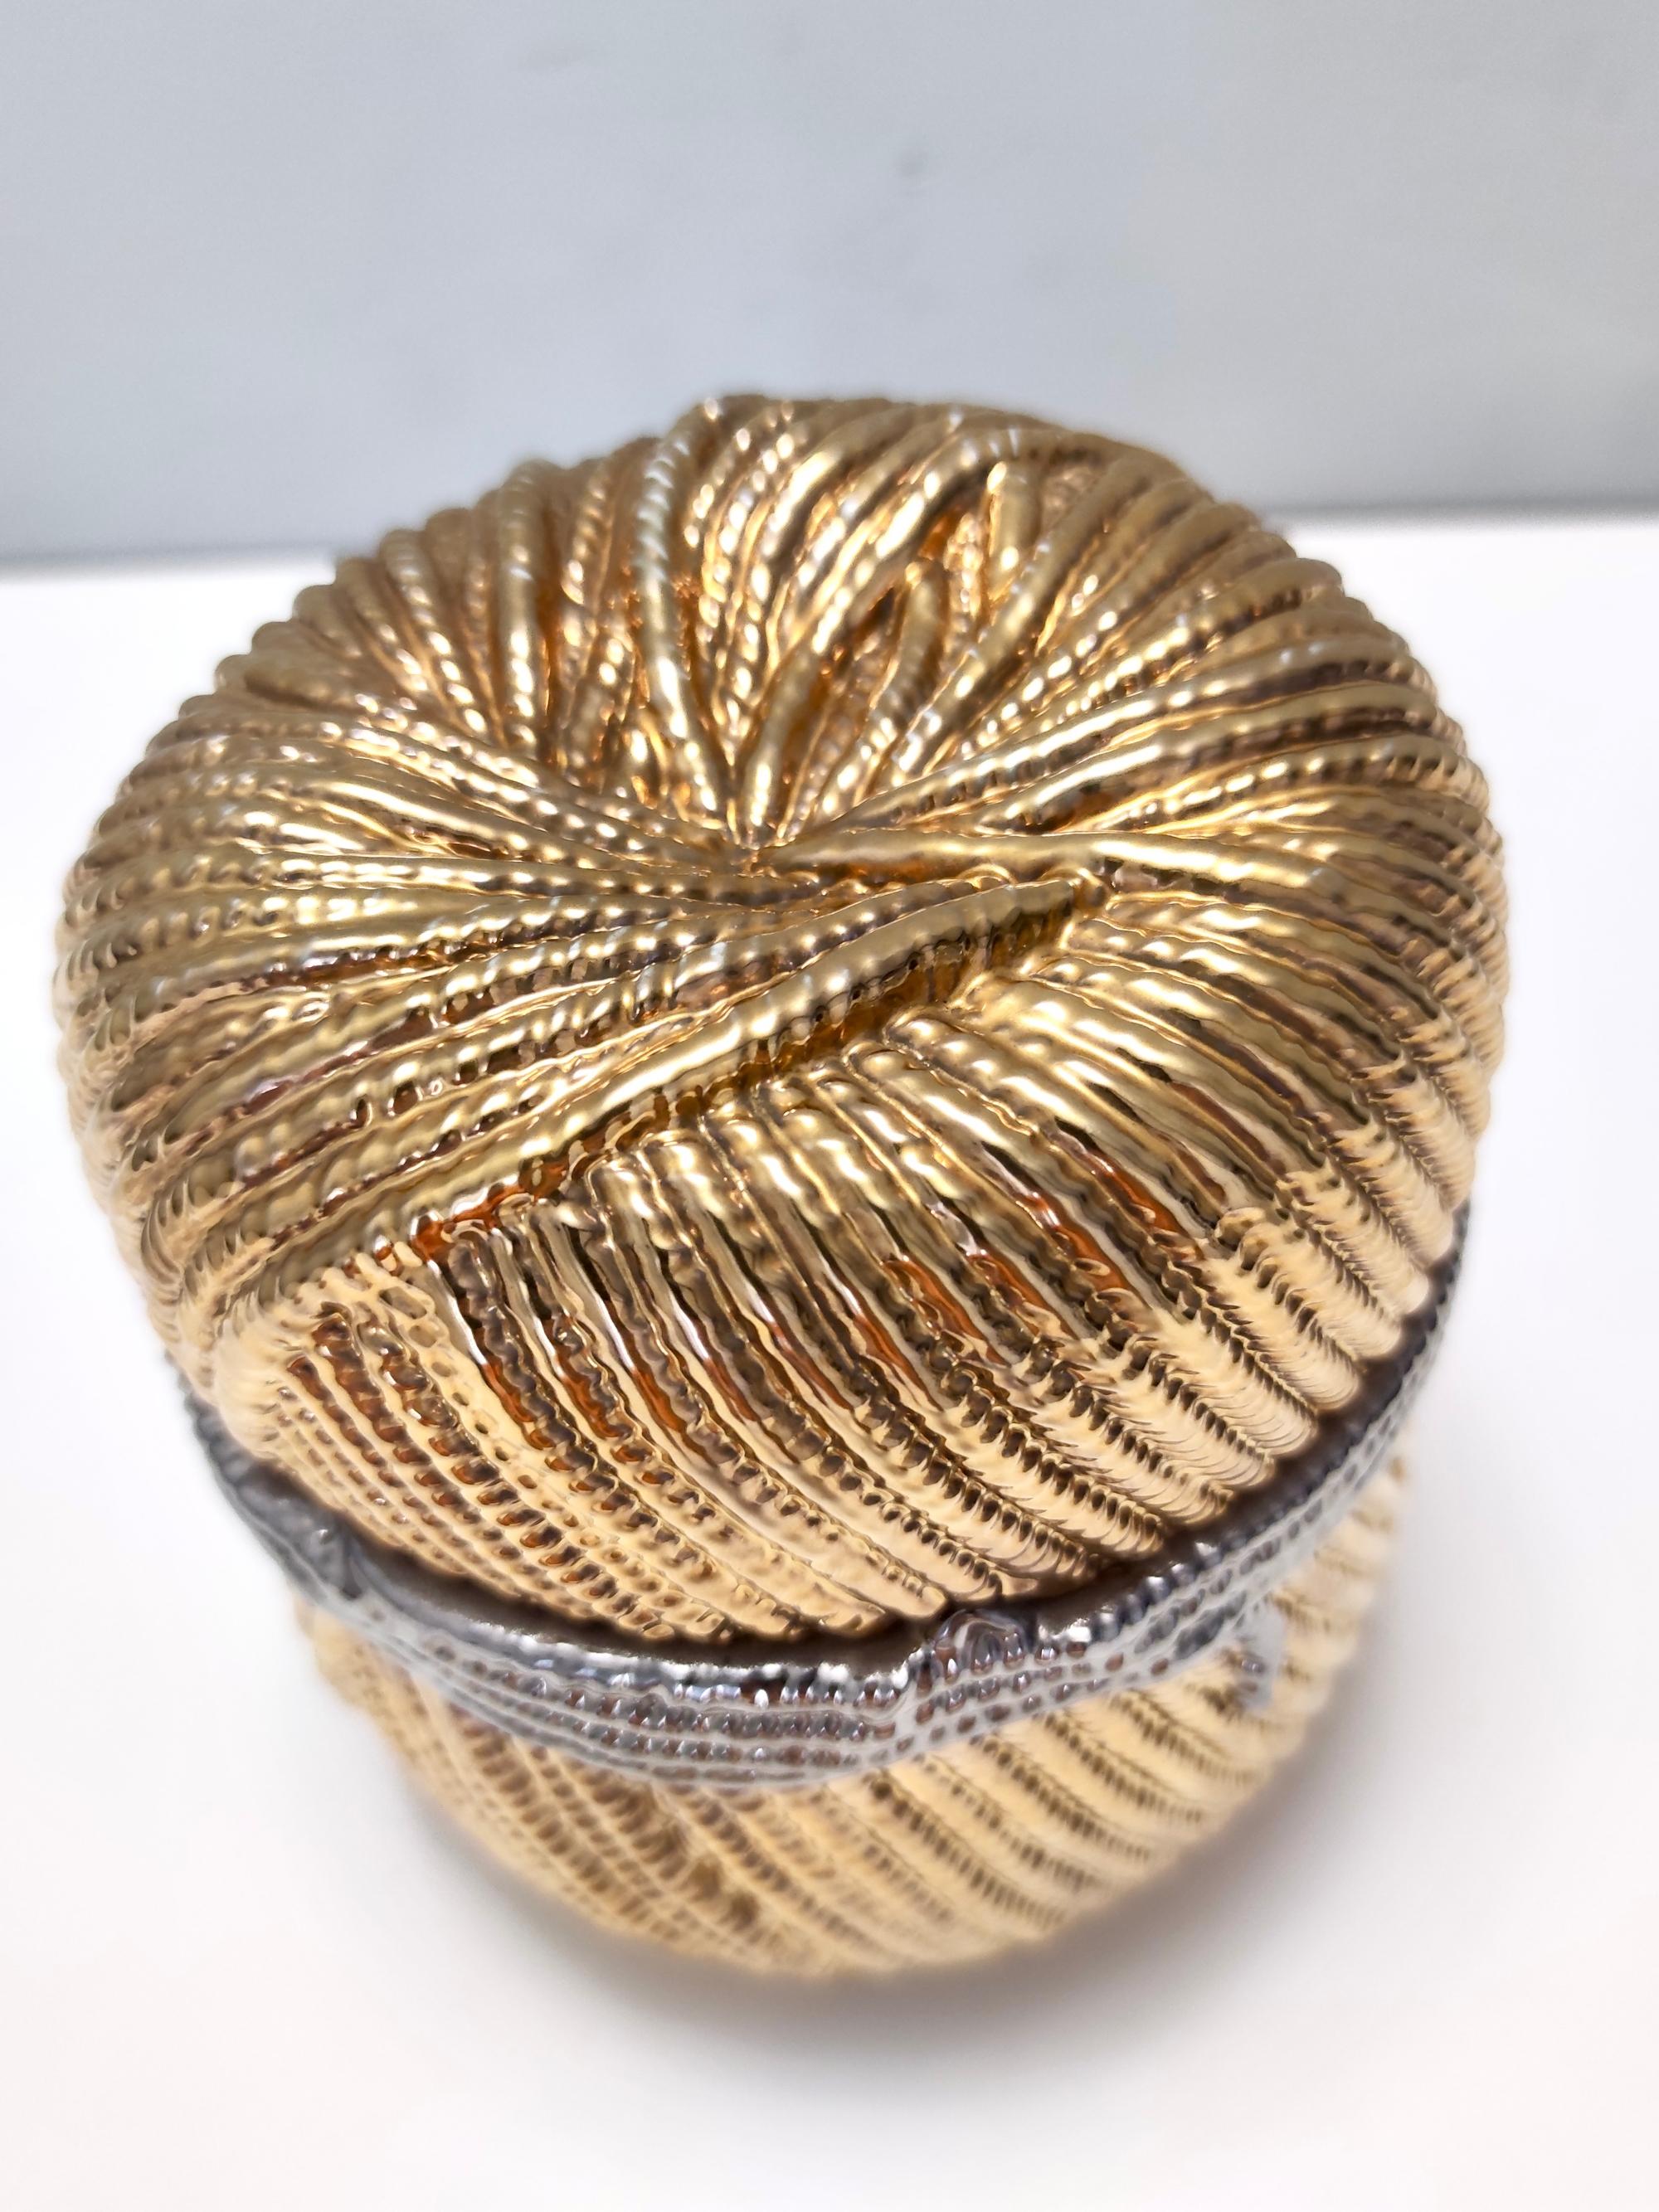 Late 20th Century Postmodern Gold and Silver Ceramic Trinket Bowl / Box by San Marco, Italy For Sale